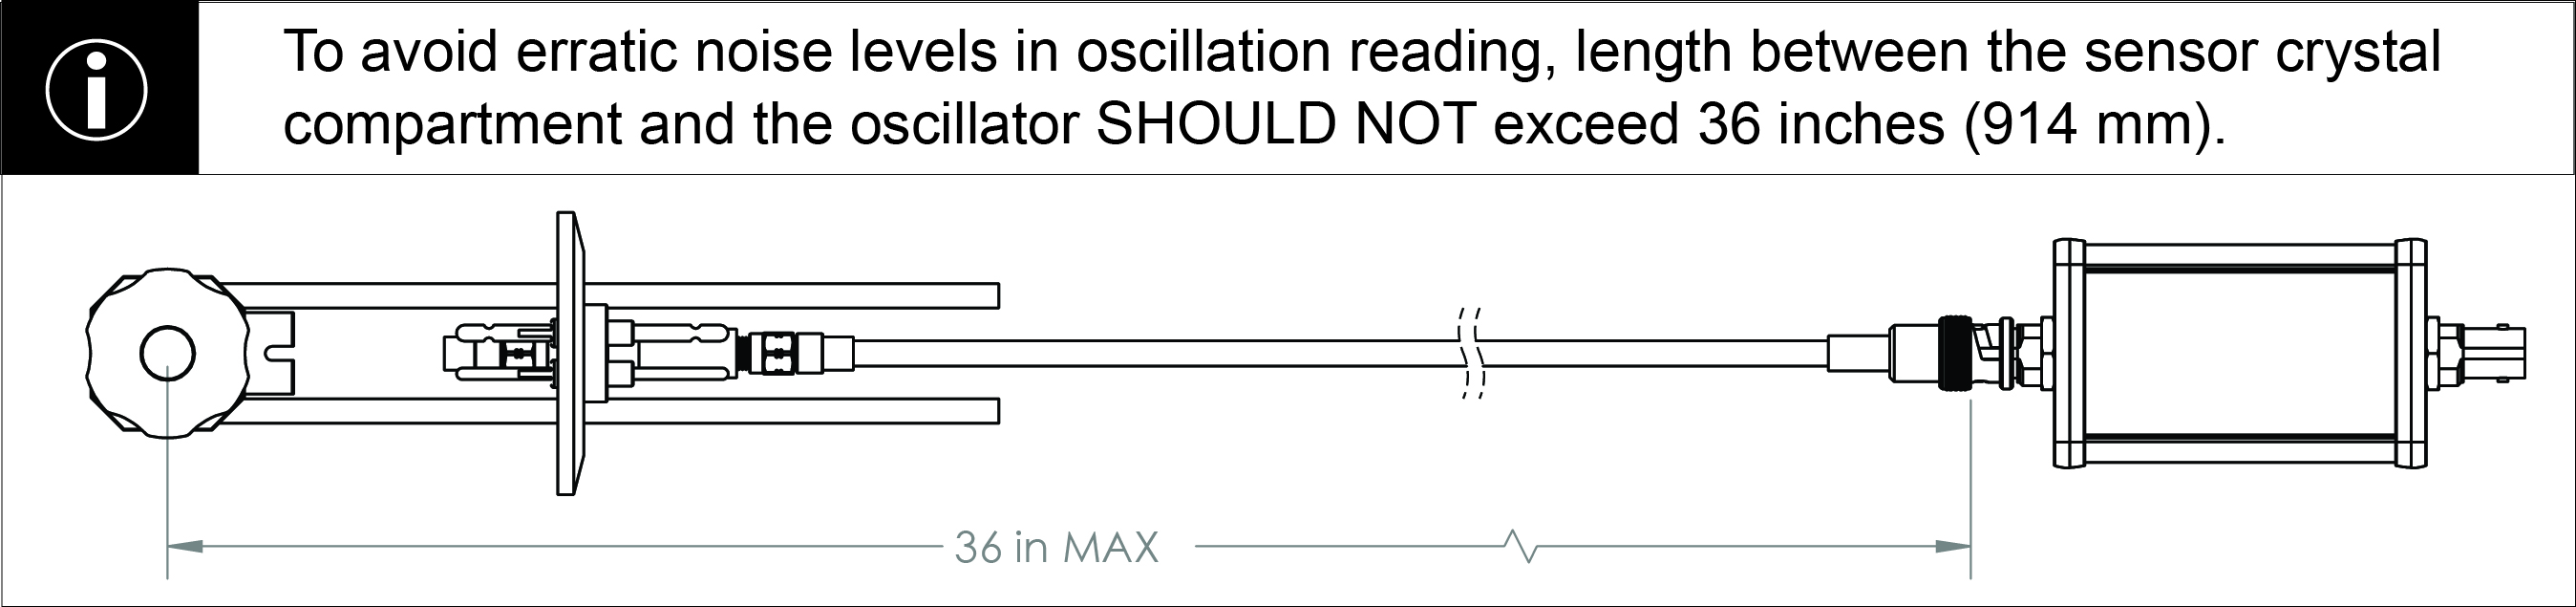 Oscillator Cable Length Restriction